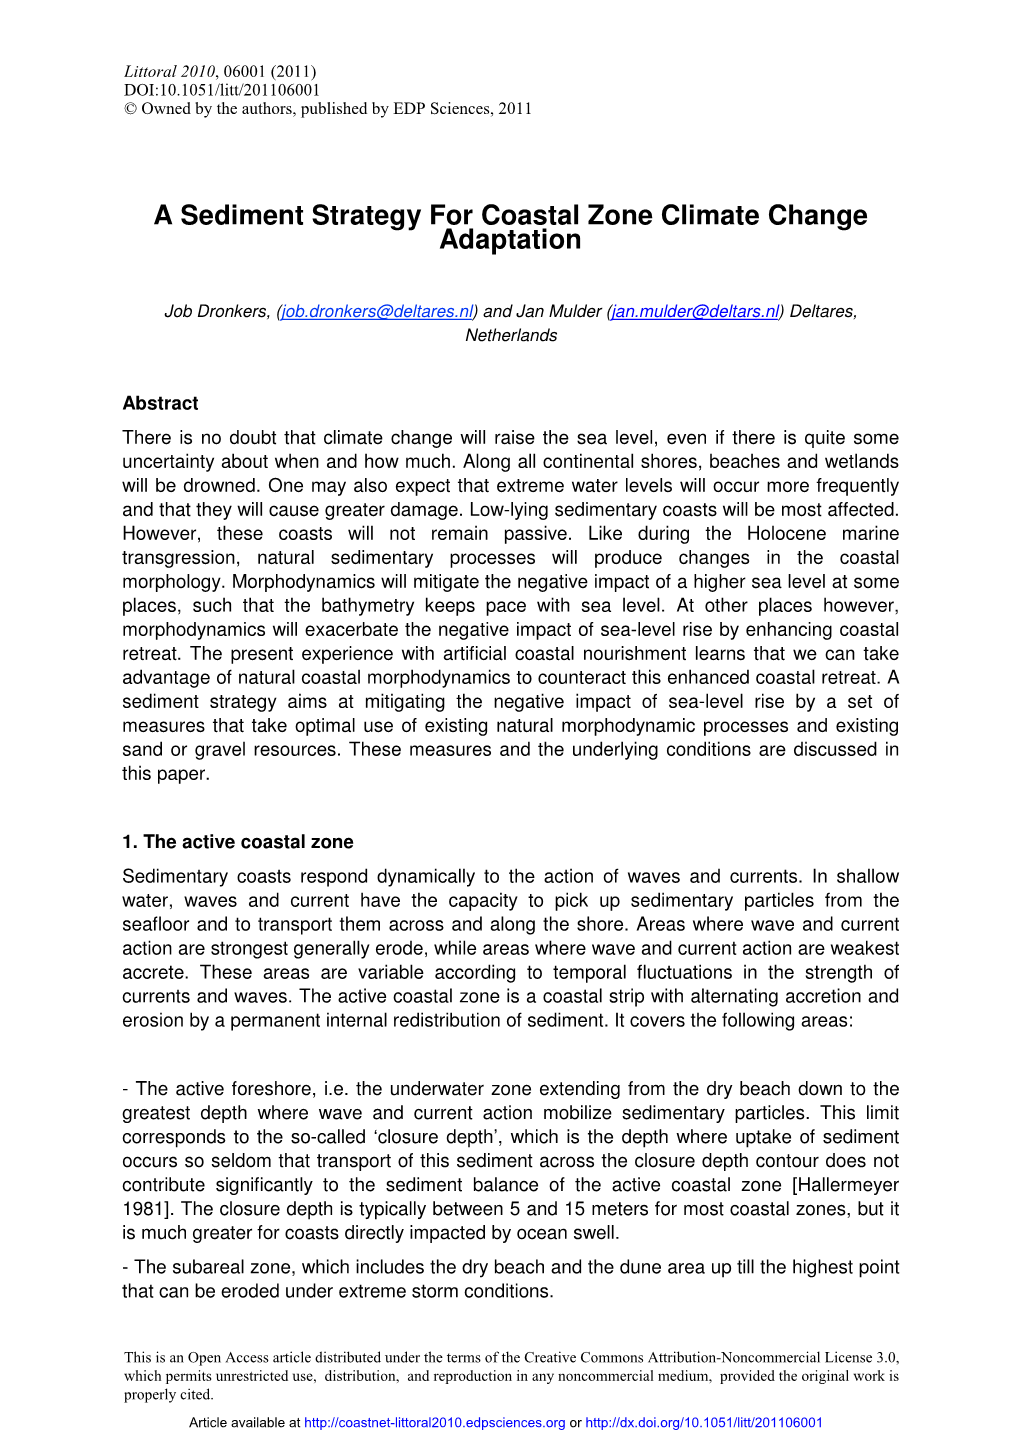 A Sediment Strategy for Coastal Zone Climate Change Adaptation